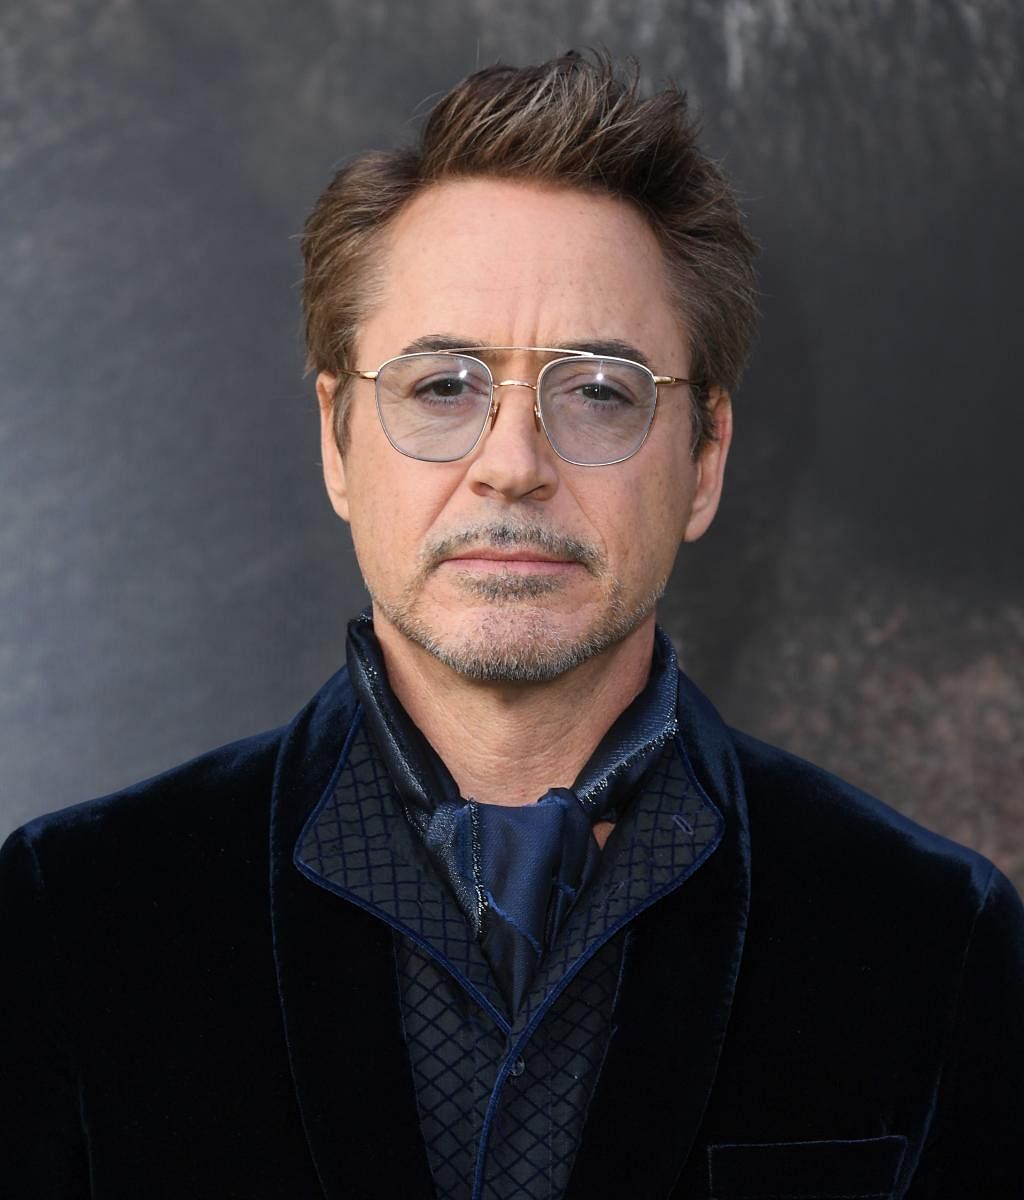 Now Robert Downey Jr, Tom Holland send messages to boy who saved sister from dog attack